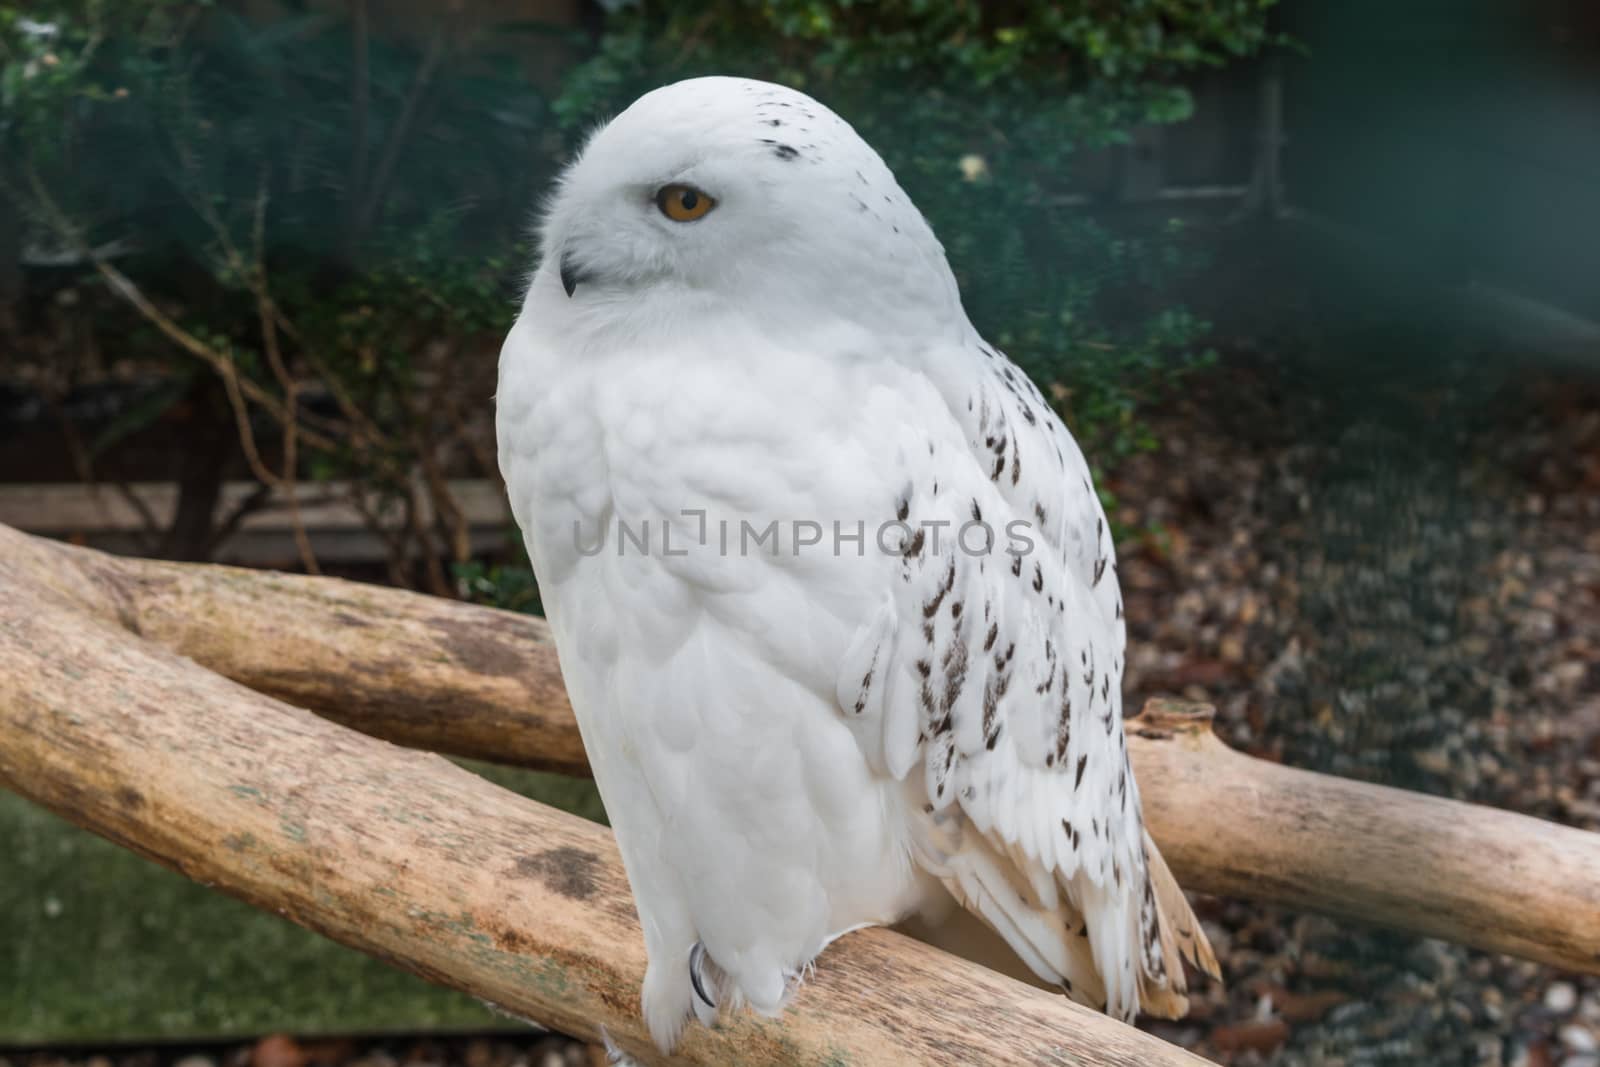 Portrait of a Snowy Owl on a white background